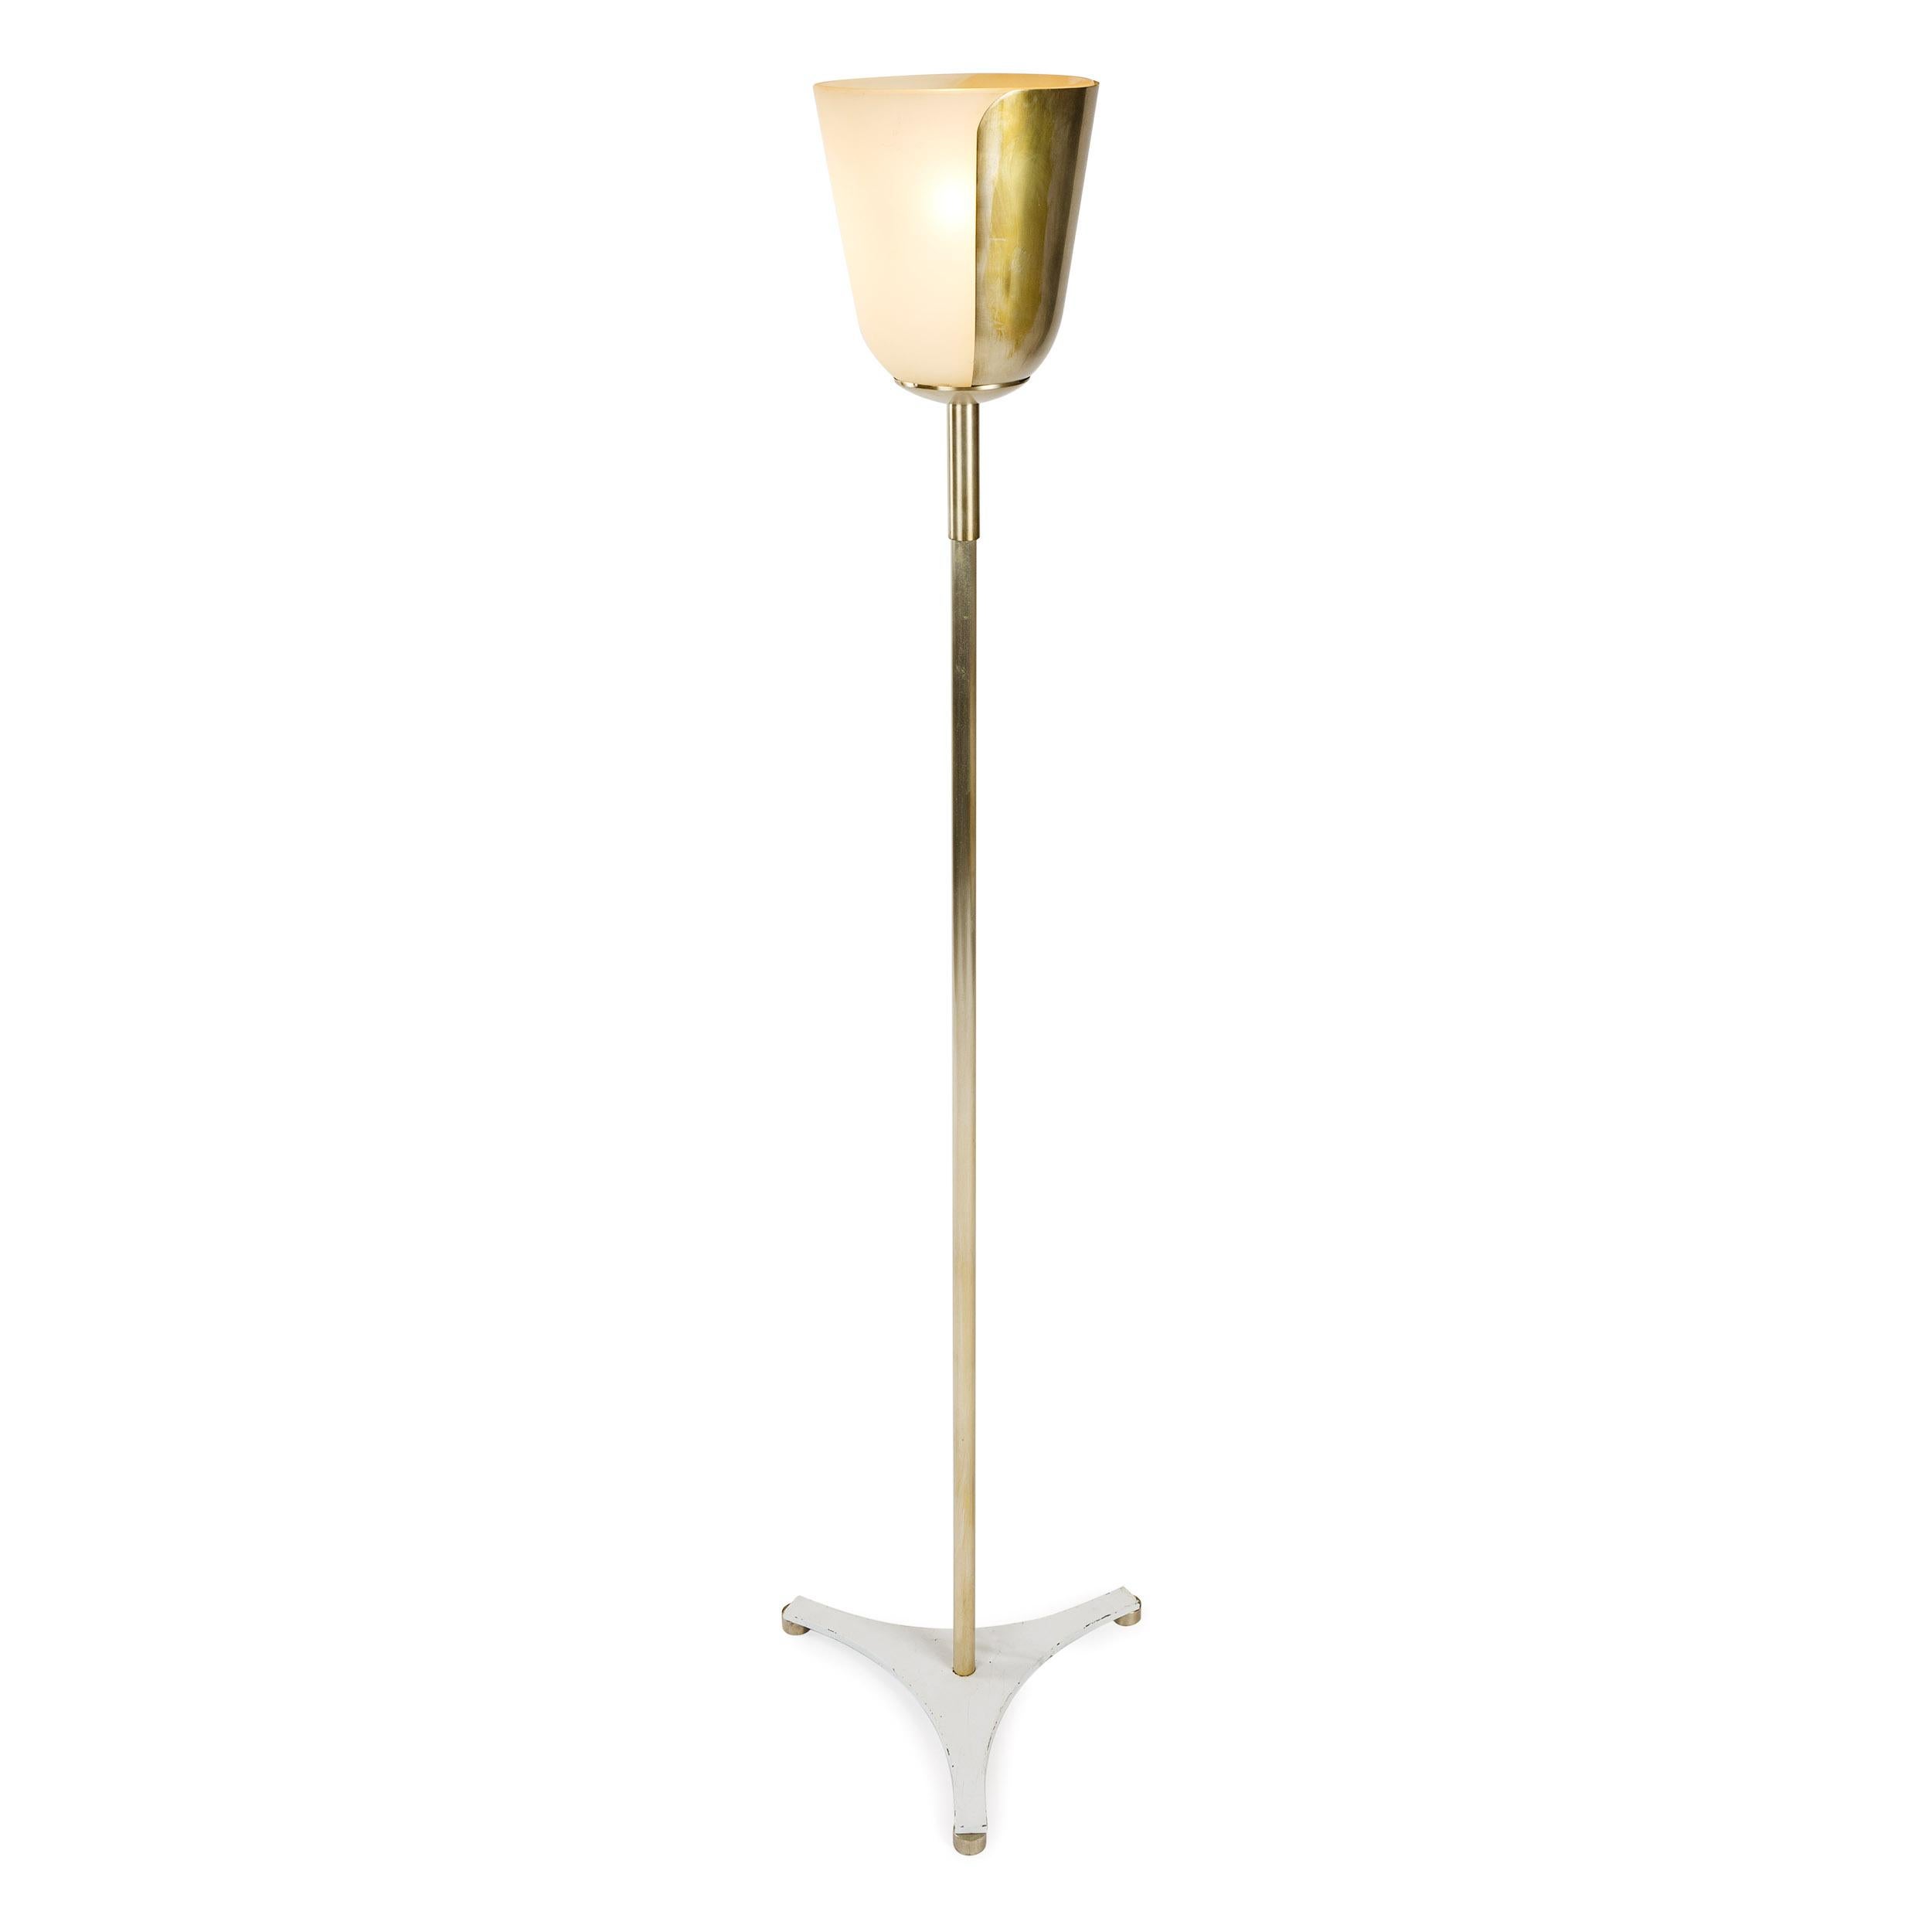 Frosted 1930s French Art Deco Torchere Floor Lamp by Jean Perzel For Sale